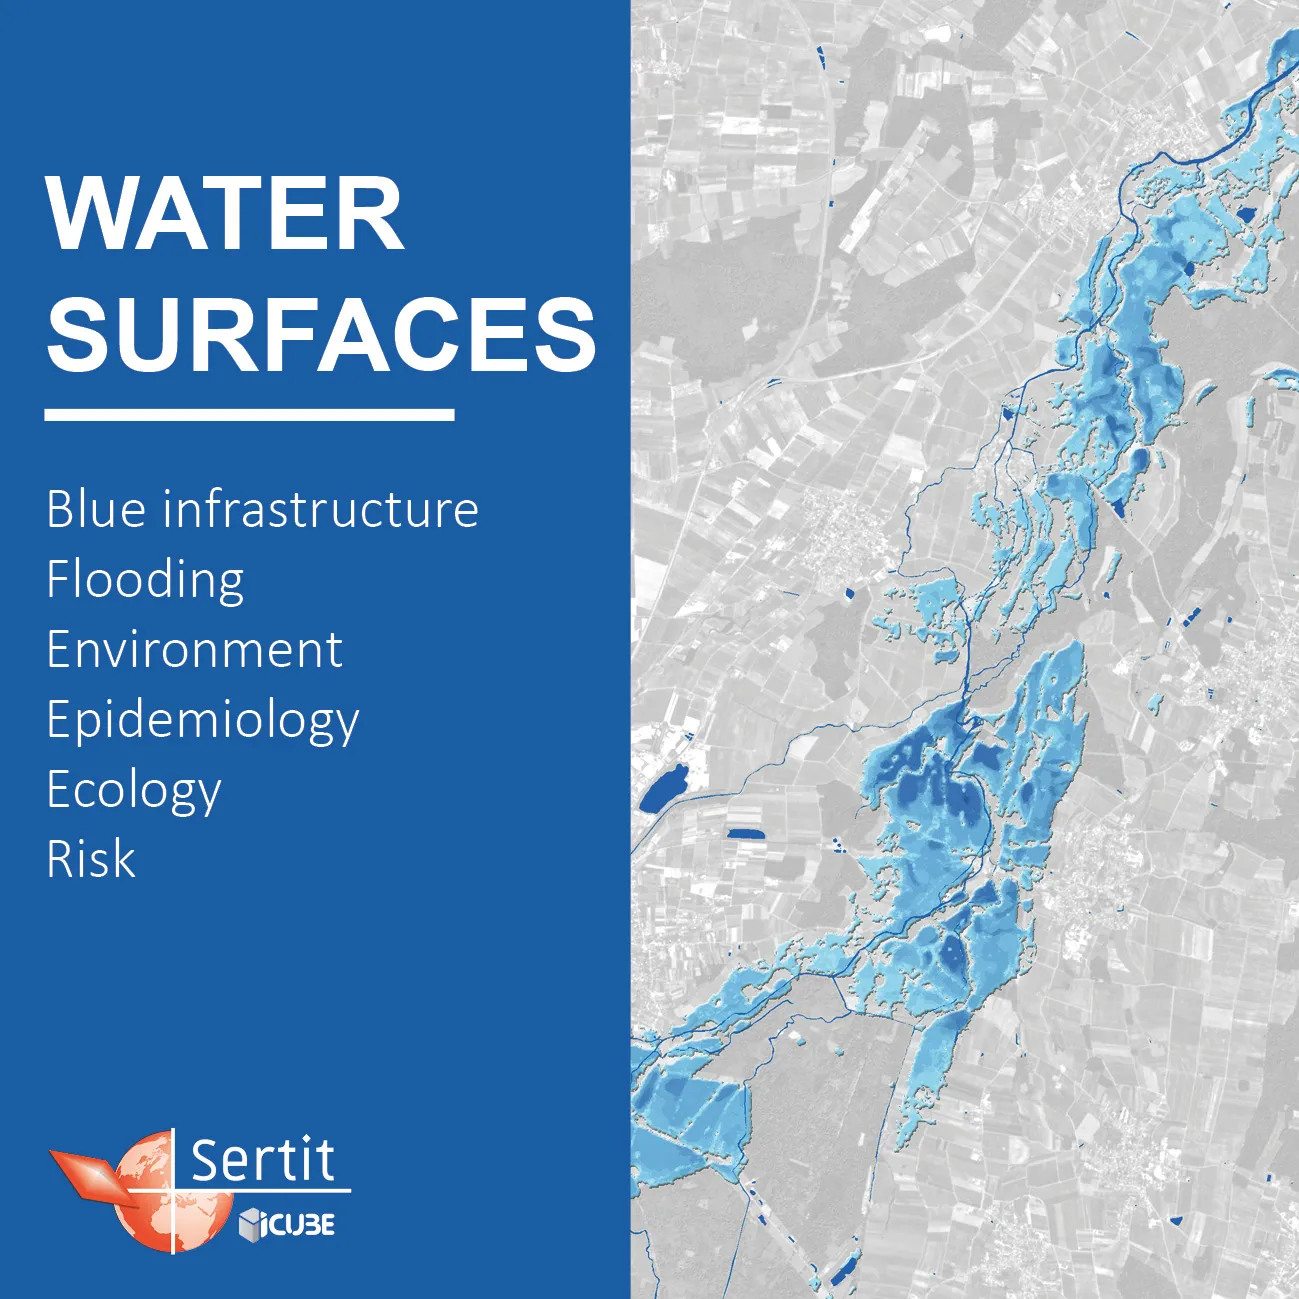 Water Surfaces: Blue infrastructure, Flooding, Environment, Epidemiology, Ecology, Risk